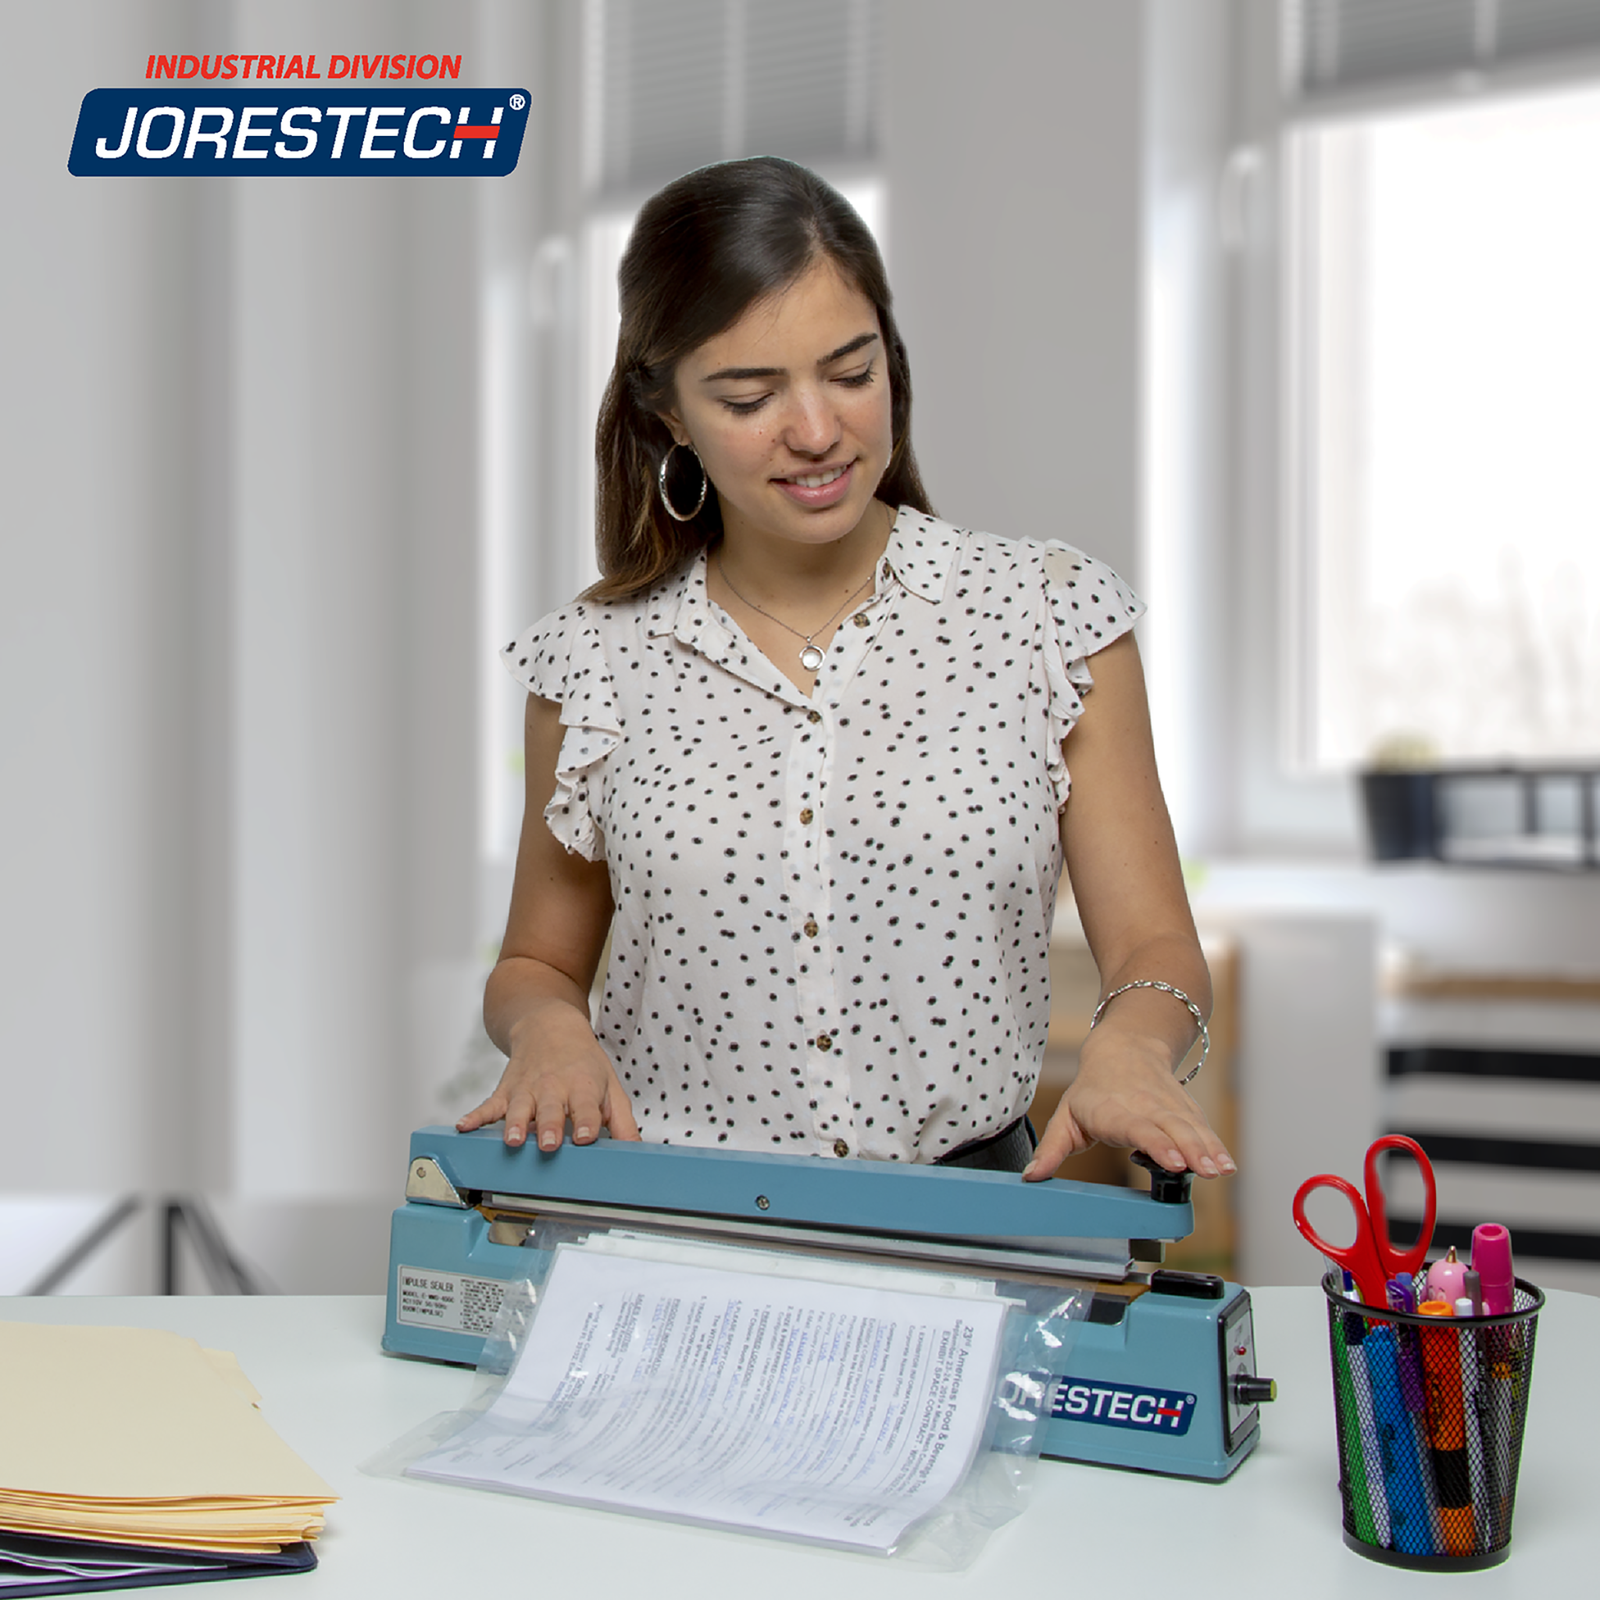 Young woman in an office setting working on top of a desk with a 16 inch manual impulse bag sealer sealing documents inside a heat sealable bags.